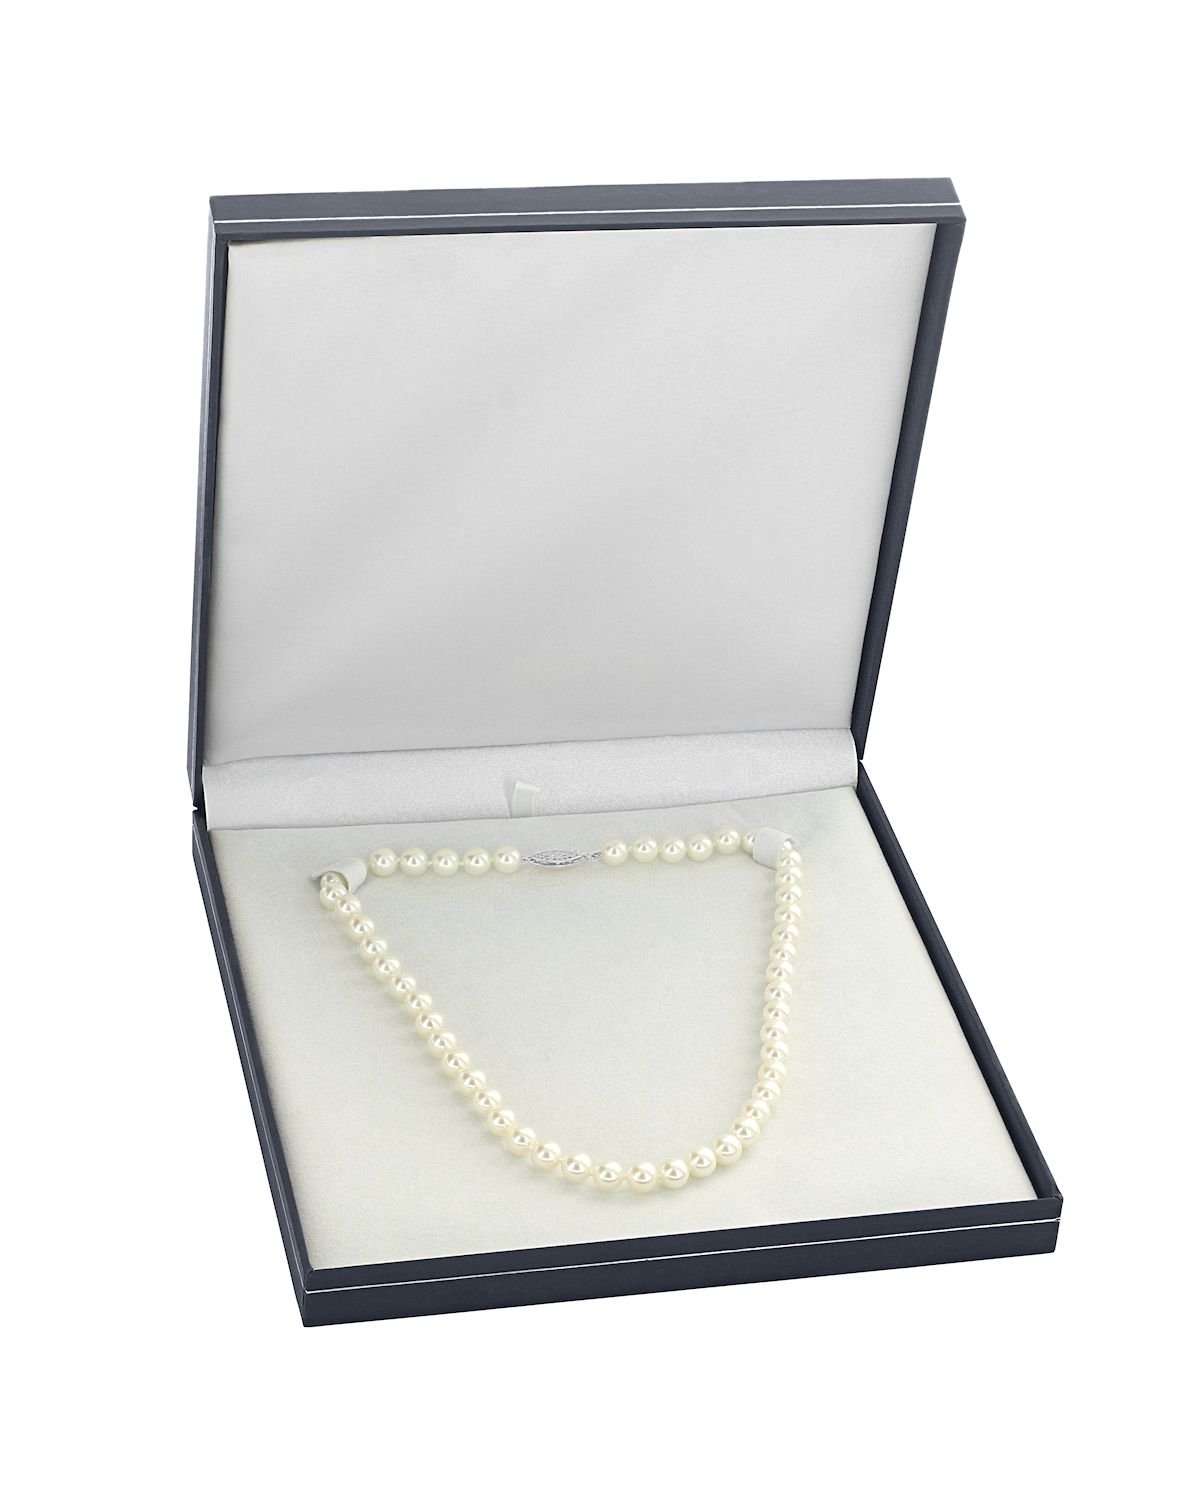 White Japanese Akoya Pearl Necklace, 7.0-7.5mm - AAA Quality